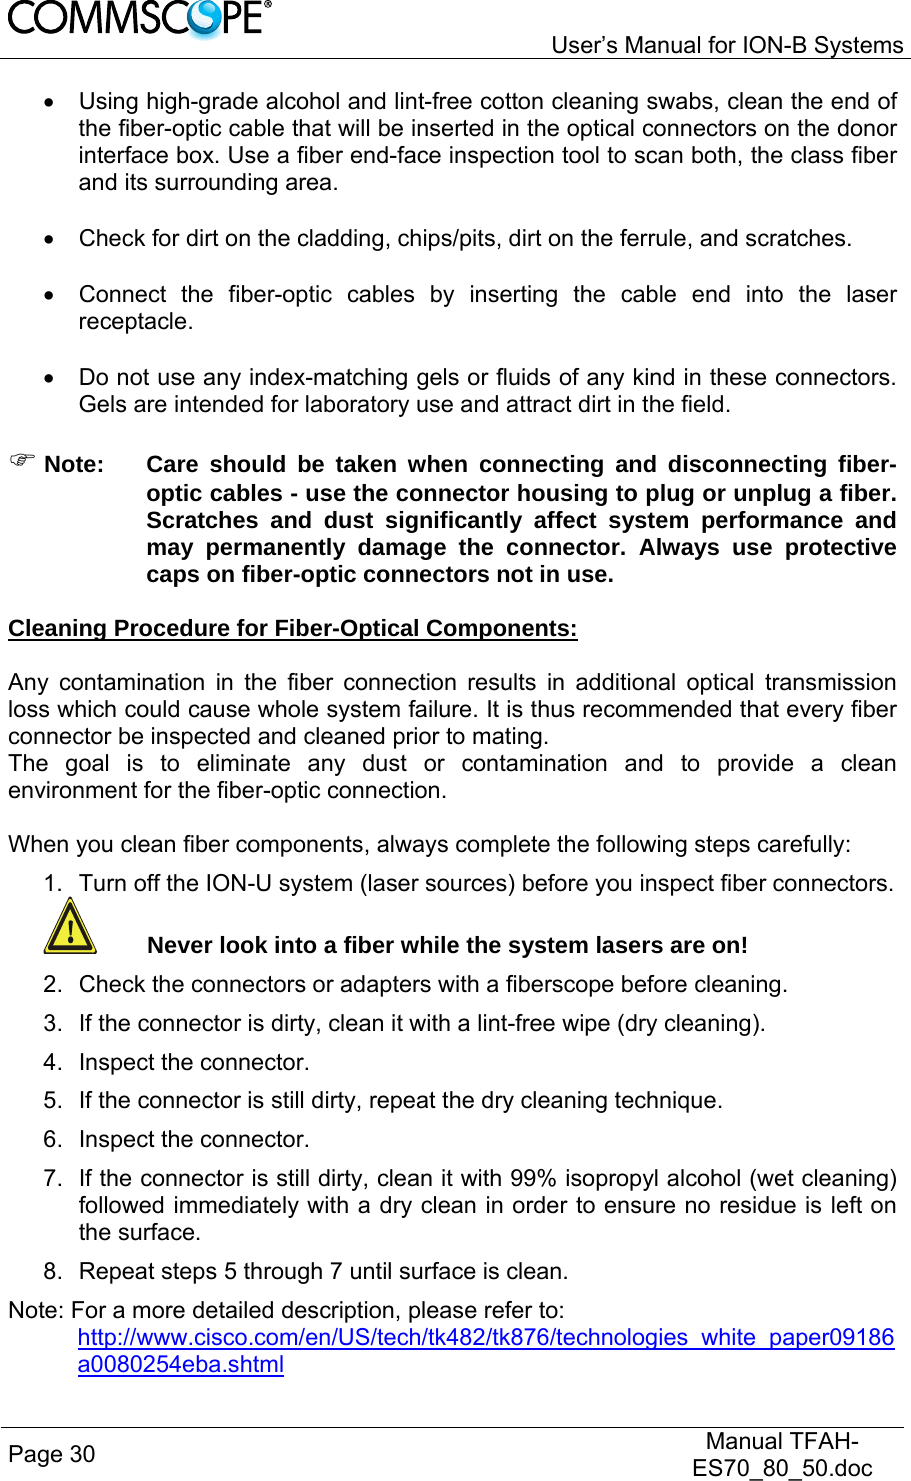   User’s Manual for ION-B Systems Page 30   Manual TFAH-ES70_80_50.doc    Using high-grade alcohol and lint-free cotton cleaning swabs, clean the end of the fiber-optic cable that will be inserted in the optical connectors on the donor interface box. Use a fiber end-face inspection tool to scan both, the class fiber and its surrounding area.    Check for dirt on the cladding, chips/pits, dirt on the ferrule, and scratches.    Connect the fiber-optic cables by inserting the cable end into the laser receptacle.    Do not use any index-matching gels or fluids of any kind in these connectors. Gels are intended for laboratory use and attract dirt in the field.   Note:  Care should be taken when connecting and disconnecting fiber-optic cables - use the connector housing to plug or unplug a fiber. Scratches and dust significantly affect system performance and may permanently damage the connector. Always use protective caps on fiber-optic connectors not in use.  Cleaning Procedure for Fiber-Optical Components:  Any contamination in the fiber connection results in additional optical transmission loss which could cause whole system failure. It is thus recommended that every fiber connector be inspected and cleaned prior to mating. The goal is to eliminate any dust or contamination and to provide a clean environment for the fiber-optic connection.   When you clean fiber components, always complete the following steps carefully: 1.  Turn off the ION-U system (laser sources) before you inspect fiber connectors.  Never look into a fiber while the system lasers are on! 2.  Check the connectors or adapters with a fiberscope before cleaning. 3.  If the connector is dirty, clean it with a lint-free wipe (dry cleaning). 4. Inspect the connector. 5.  If the connector is still dirty, repeat the dry cleaning technique. 6. Inspect the connector. 7.  If the connector is still dirty, clean it with 99% isopropyl alcohol (wet cleaning) followed immediately with a dry clean in order to ensure no residue is left on the surface. 8.  Repeat steps 5 through 7 until surface is clean. Note: For a more detailed description, please refer to:  http://www.cisco.com/en/US/tech/tk482/tk876/technologies_white_paper09186a0080254eba.shtml 